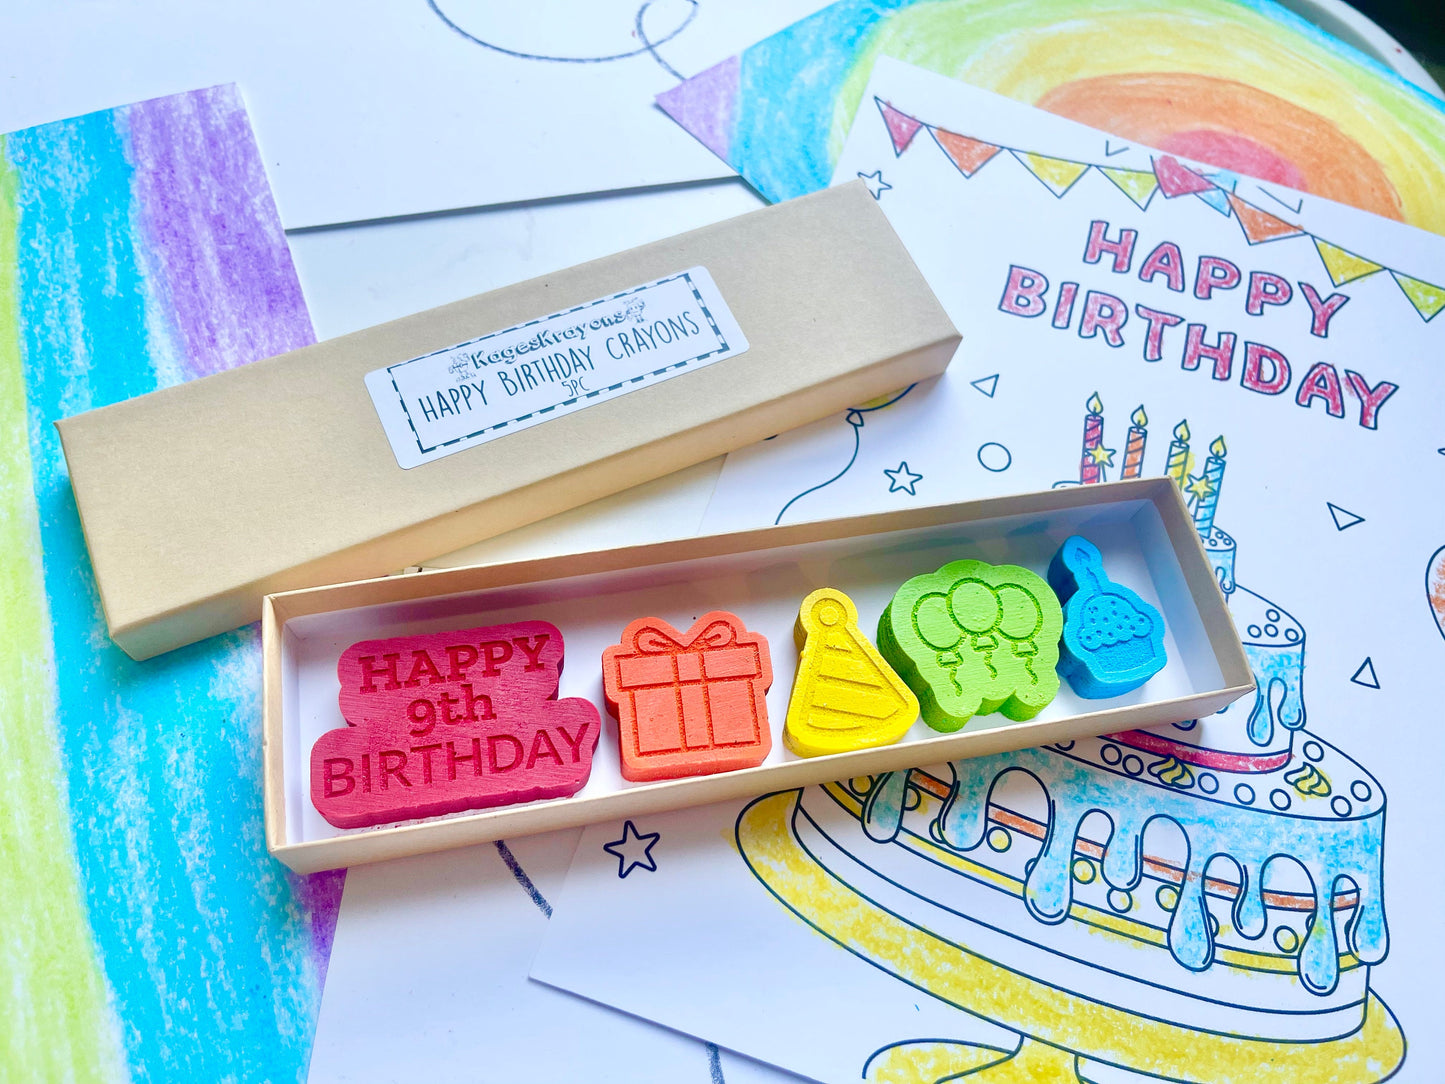 9th Birthday Crayons - 9th Birthday Gifts - Kids Happy Birthday Gifts - Kids Birthday Presents - Gifts For Kids - 9th Birthday Party Favors